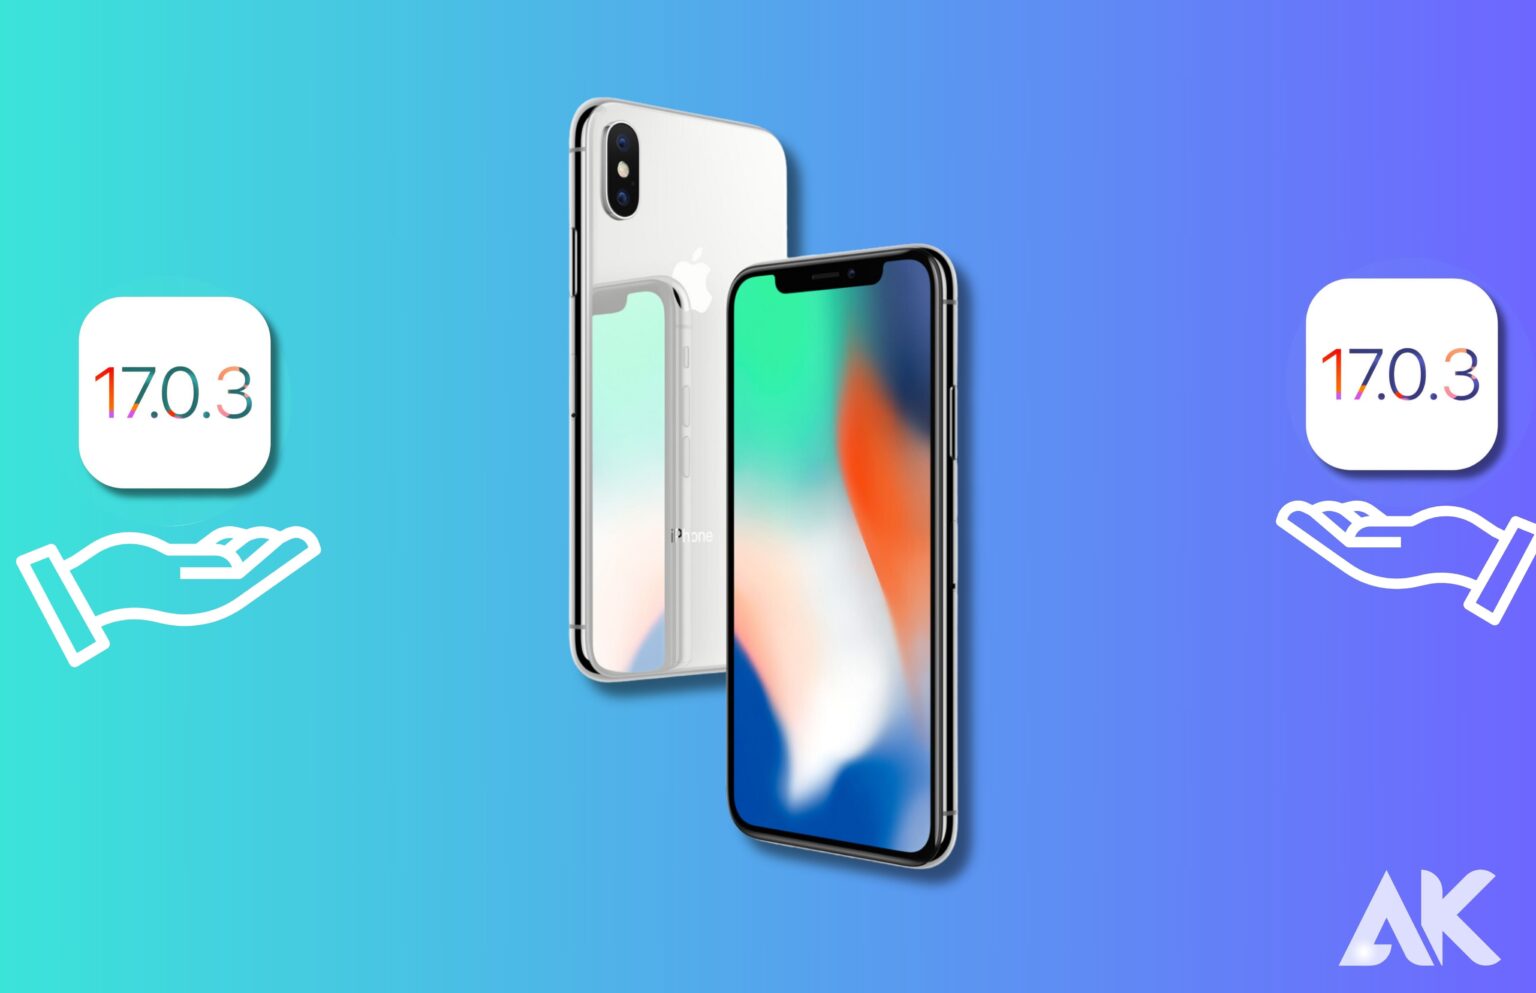 Does the iPhone X support iOS 17.0.3?